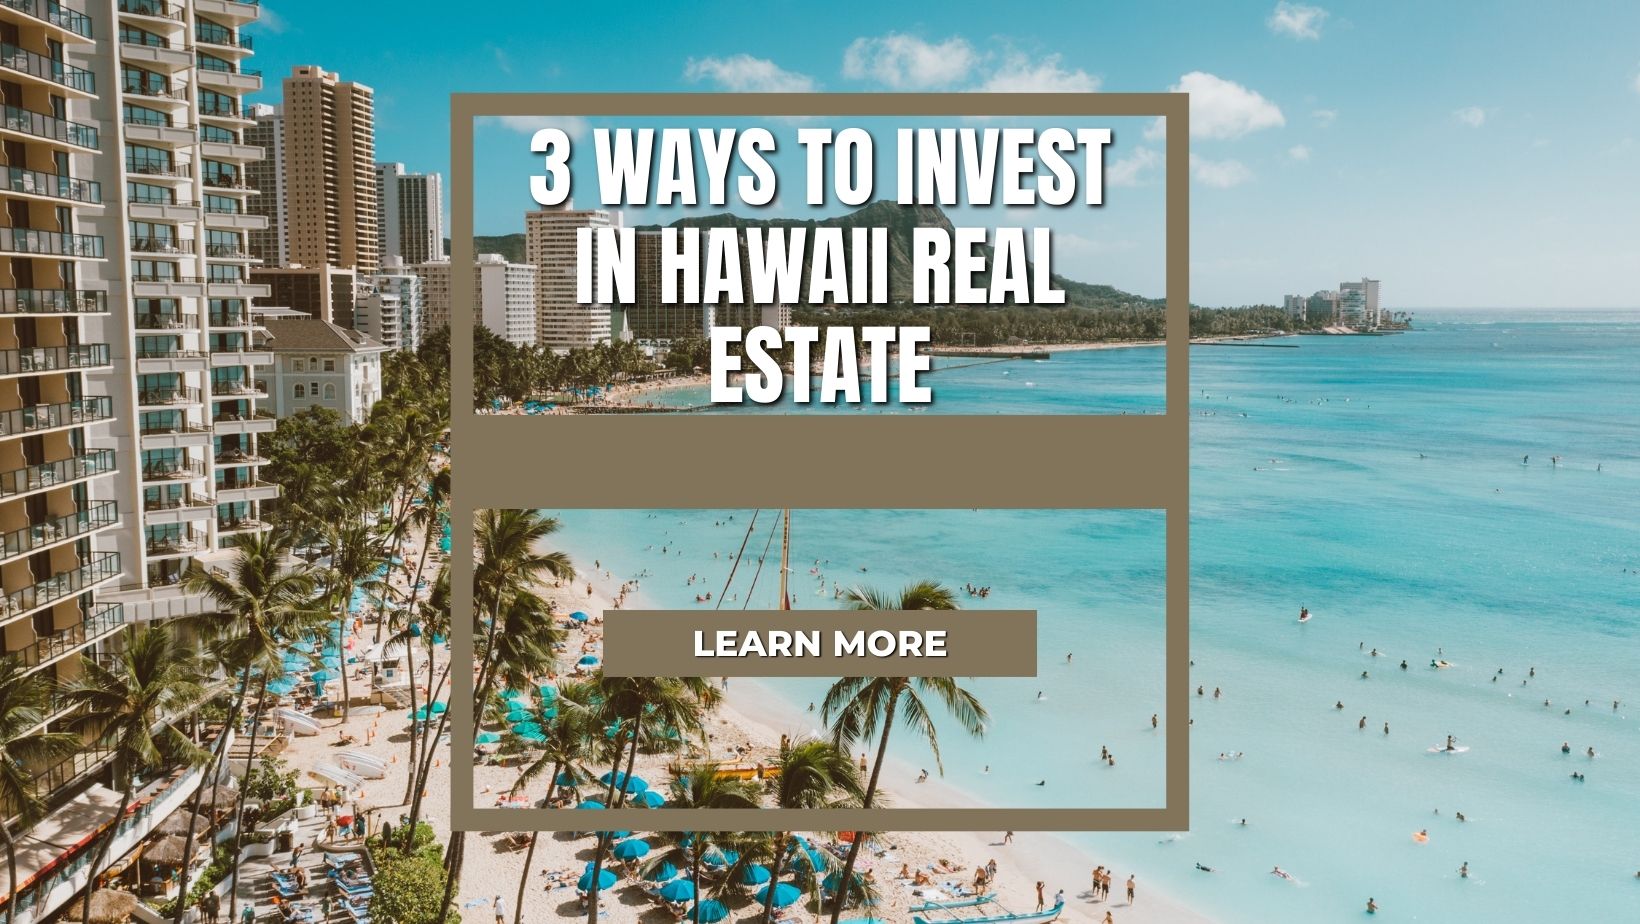 3 Ways to Invest in Hawaii Real Estate